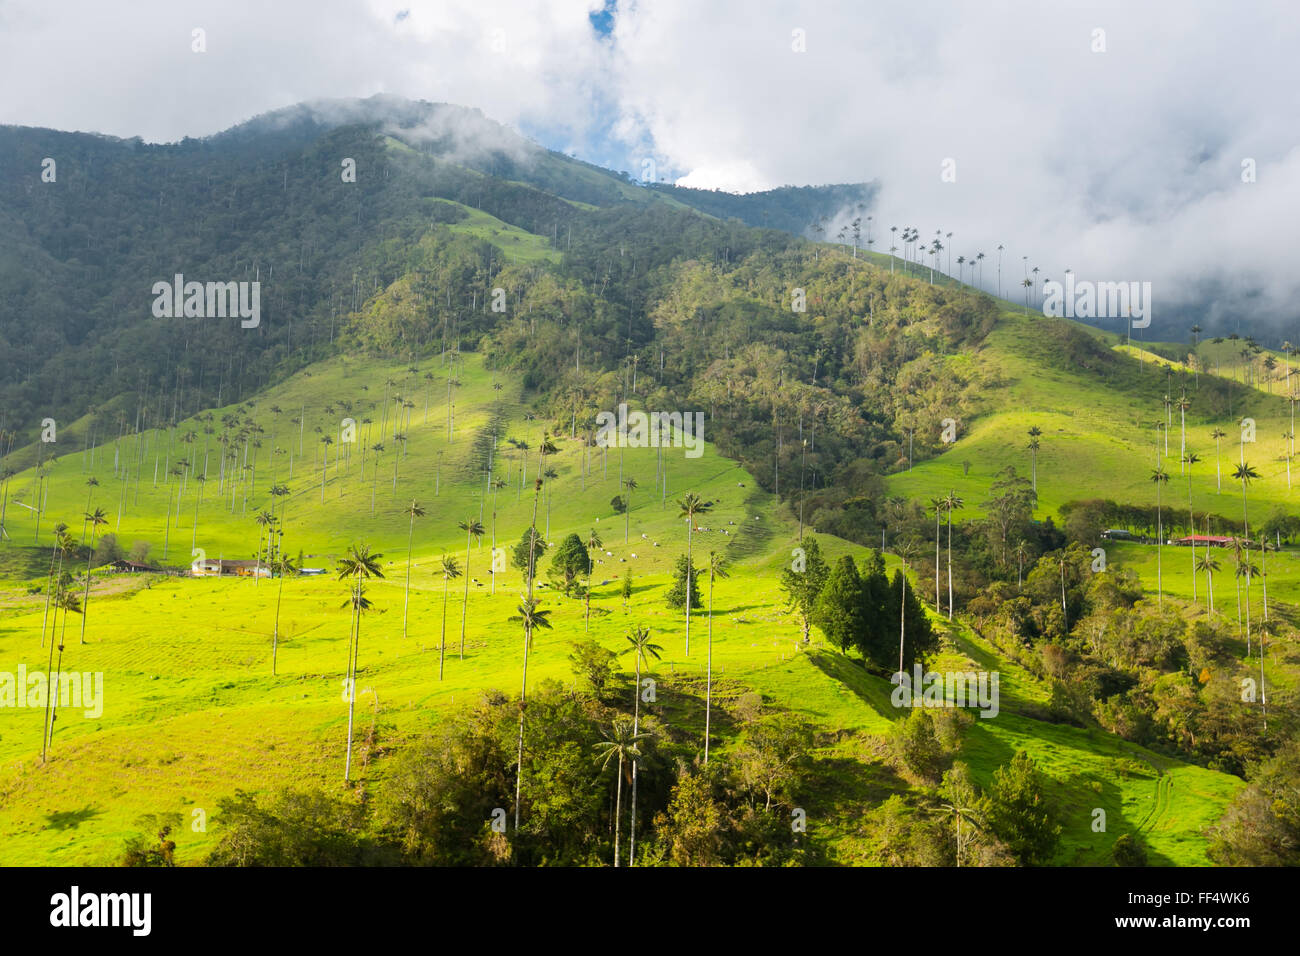 green jungle in mountains, palm trees in cocora valley, colombia, latin america Stock Photo